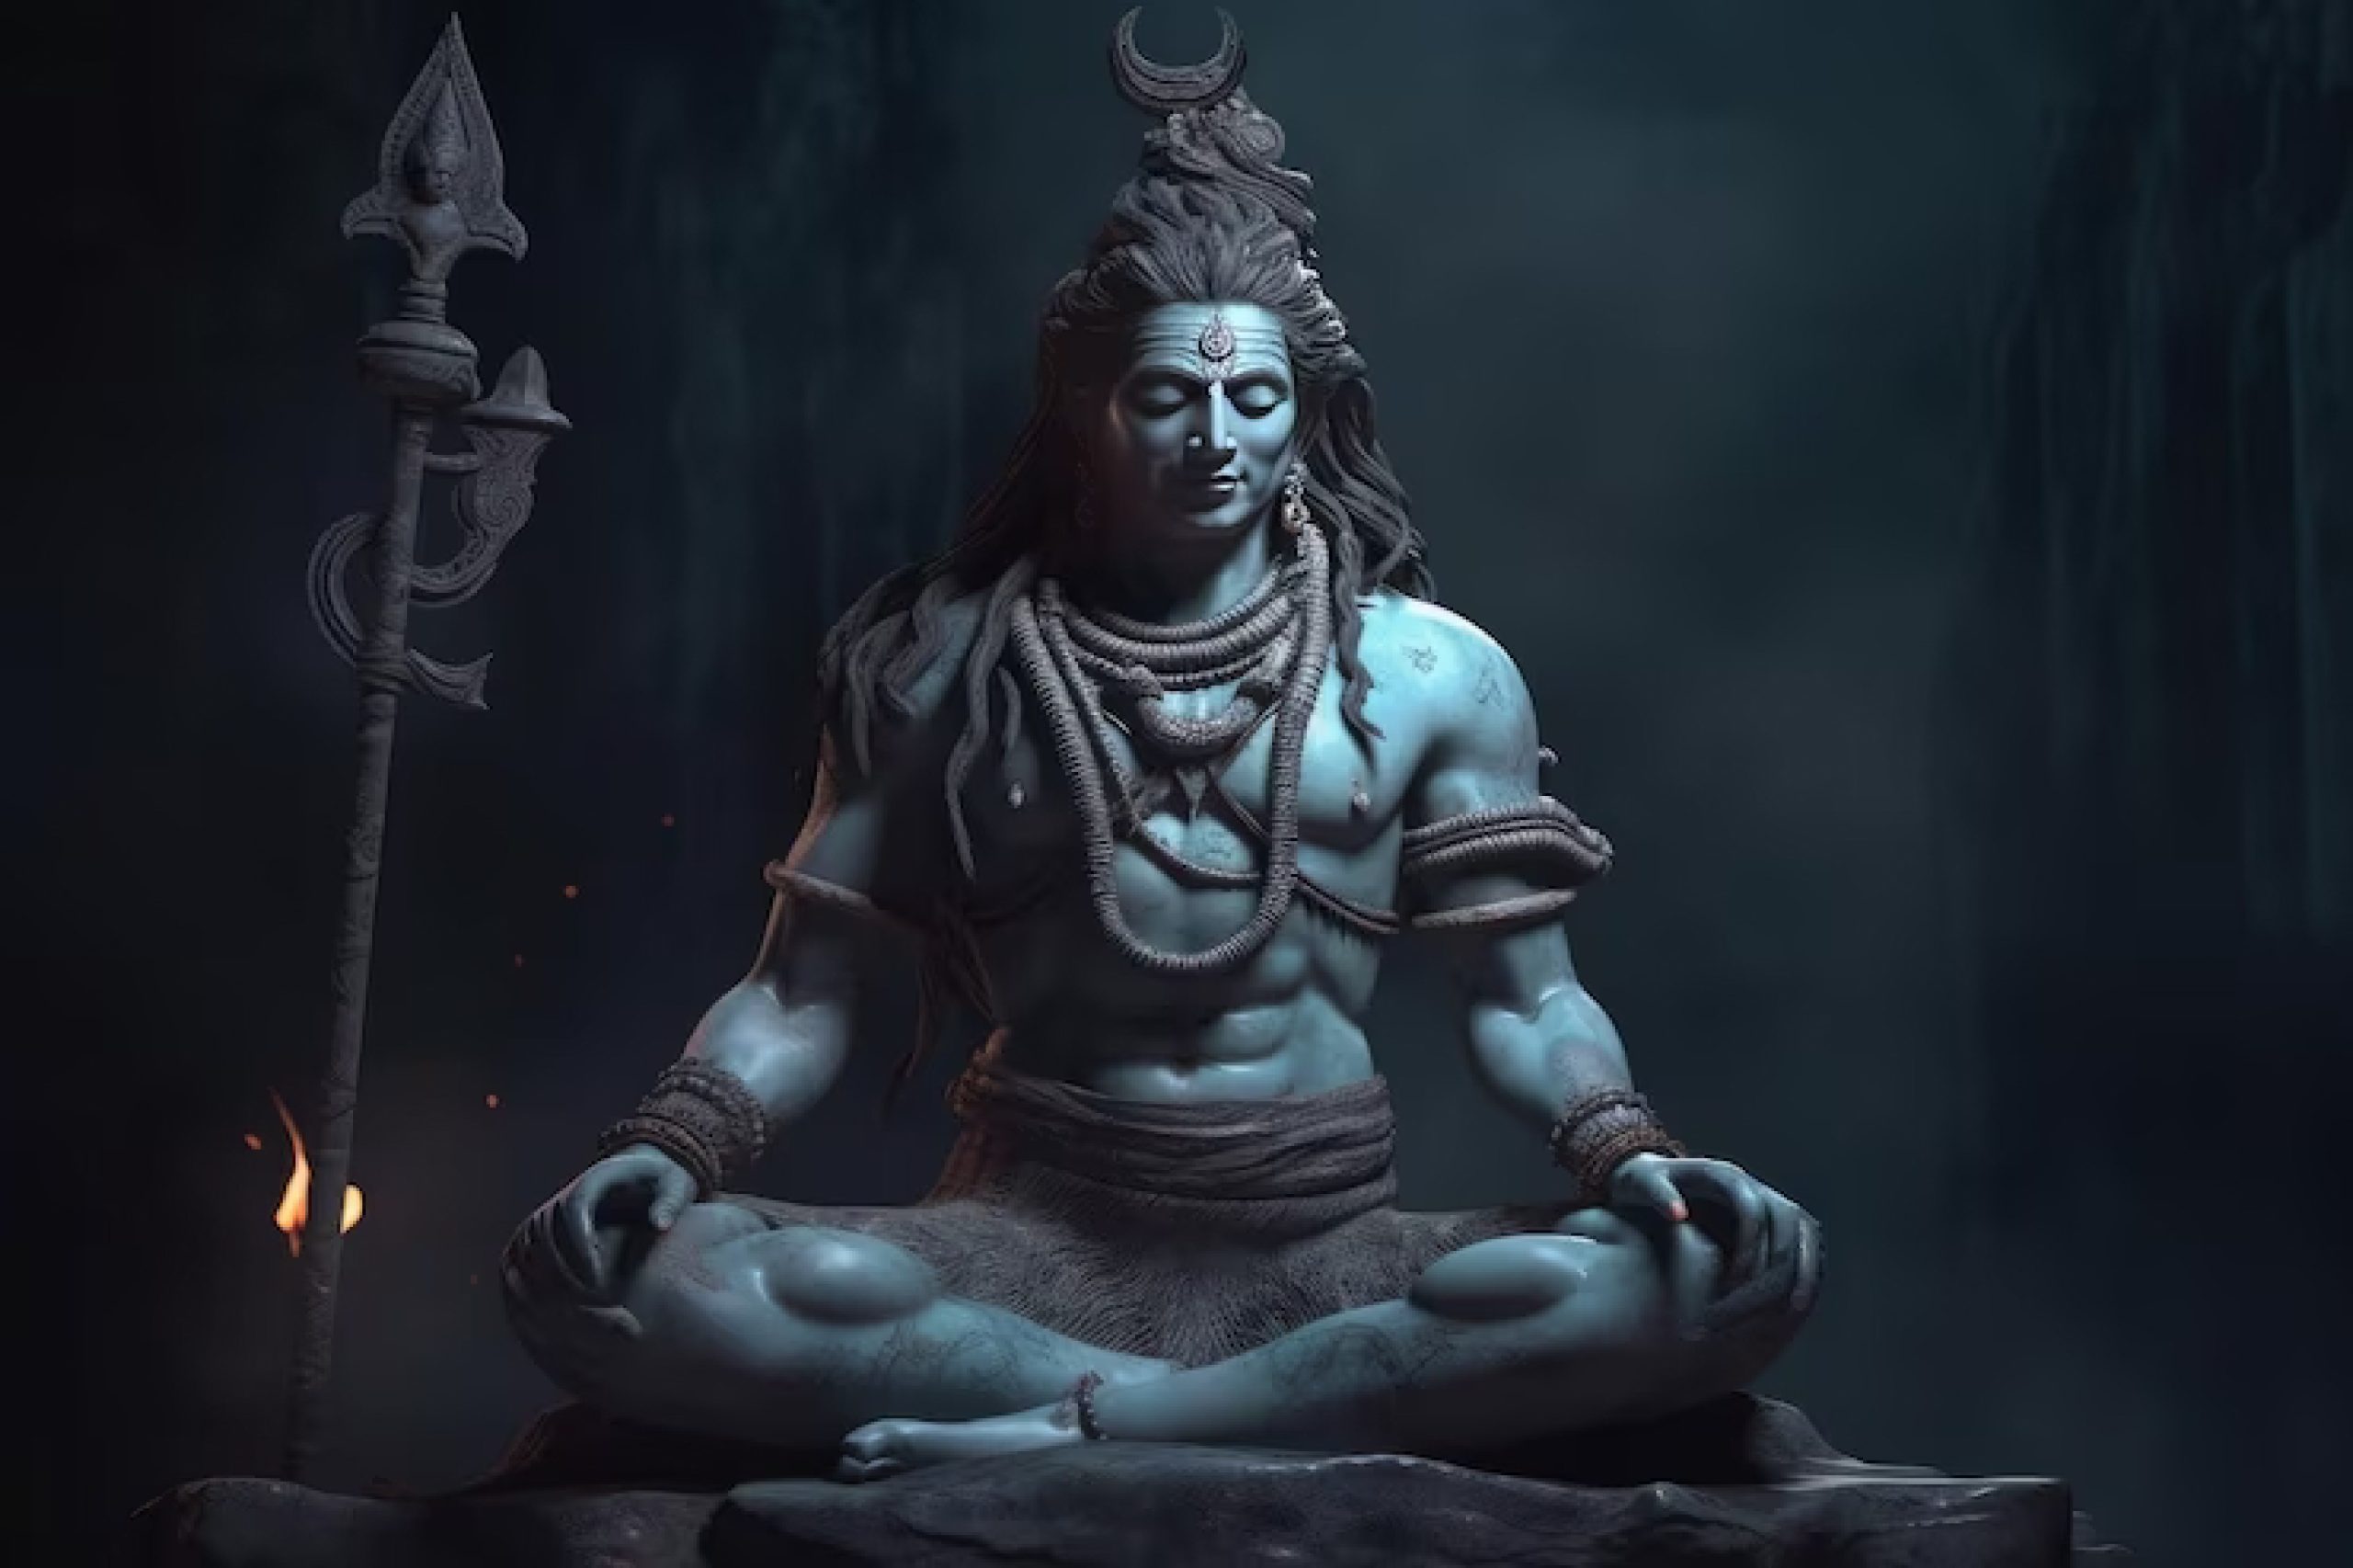 Why Is Lord Shiva Known As A Destroyer?